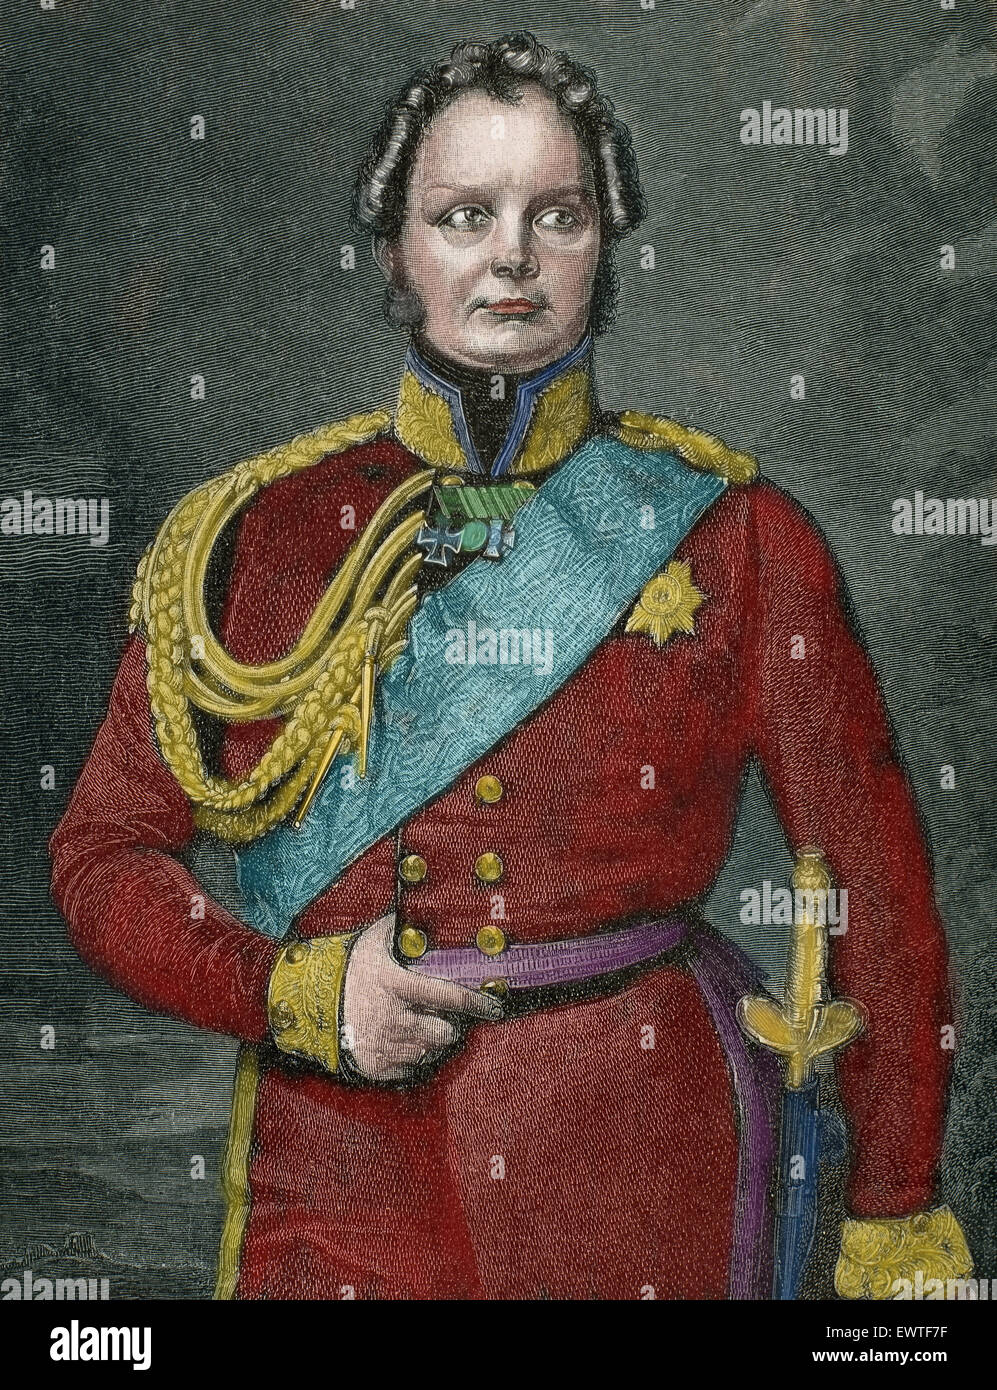 Frederick William IV of Prussia (1795-1861). King of Prusia 1840-1861. Portrait. Engraving by Niedermann. 19th century. Colored. Stock Photo